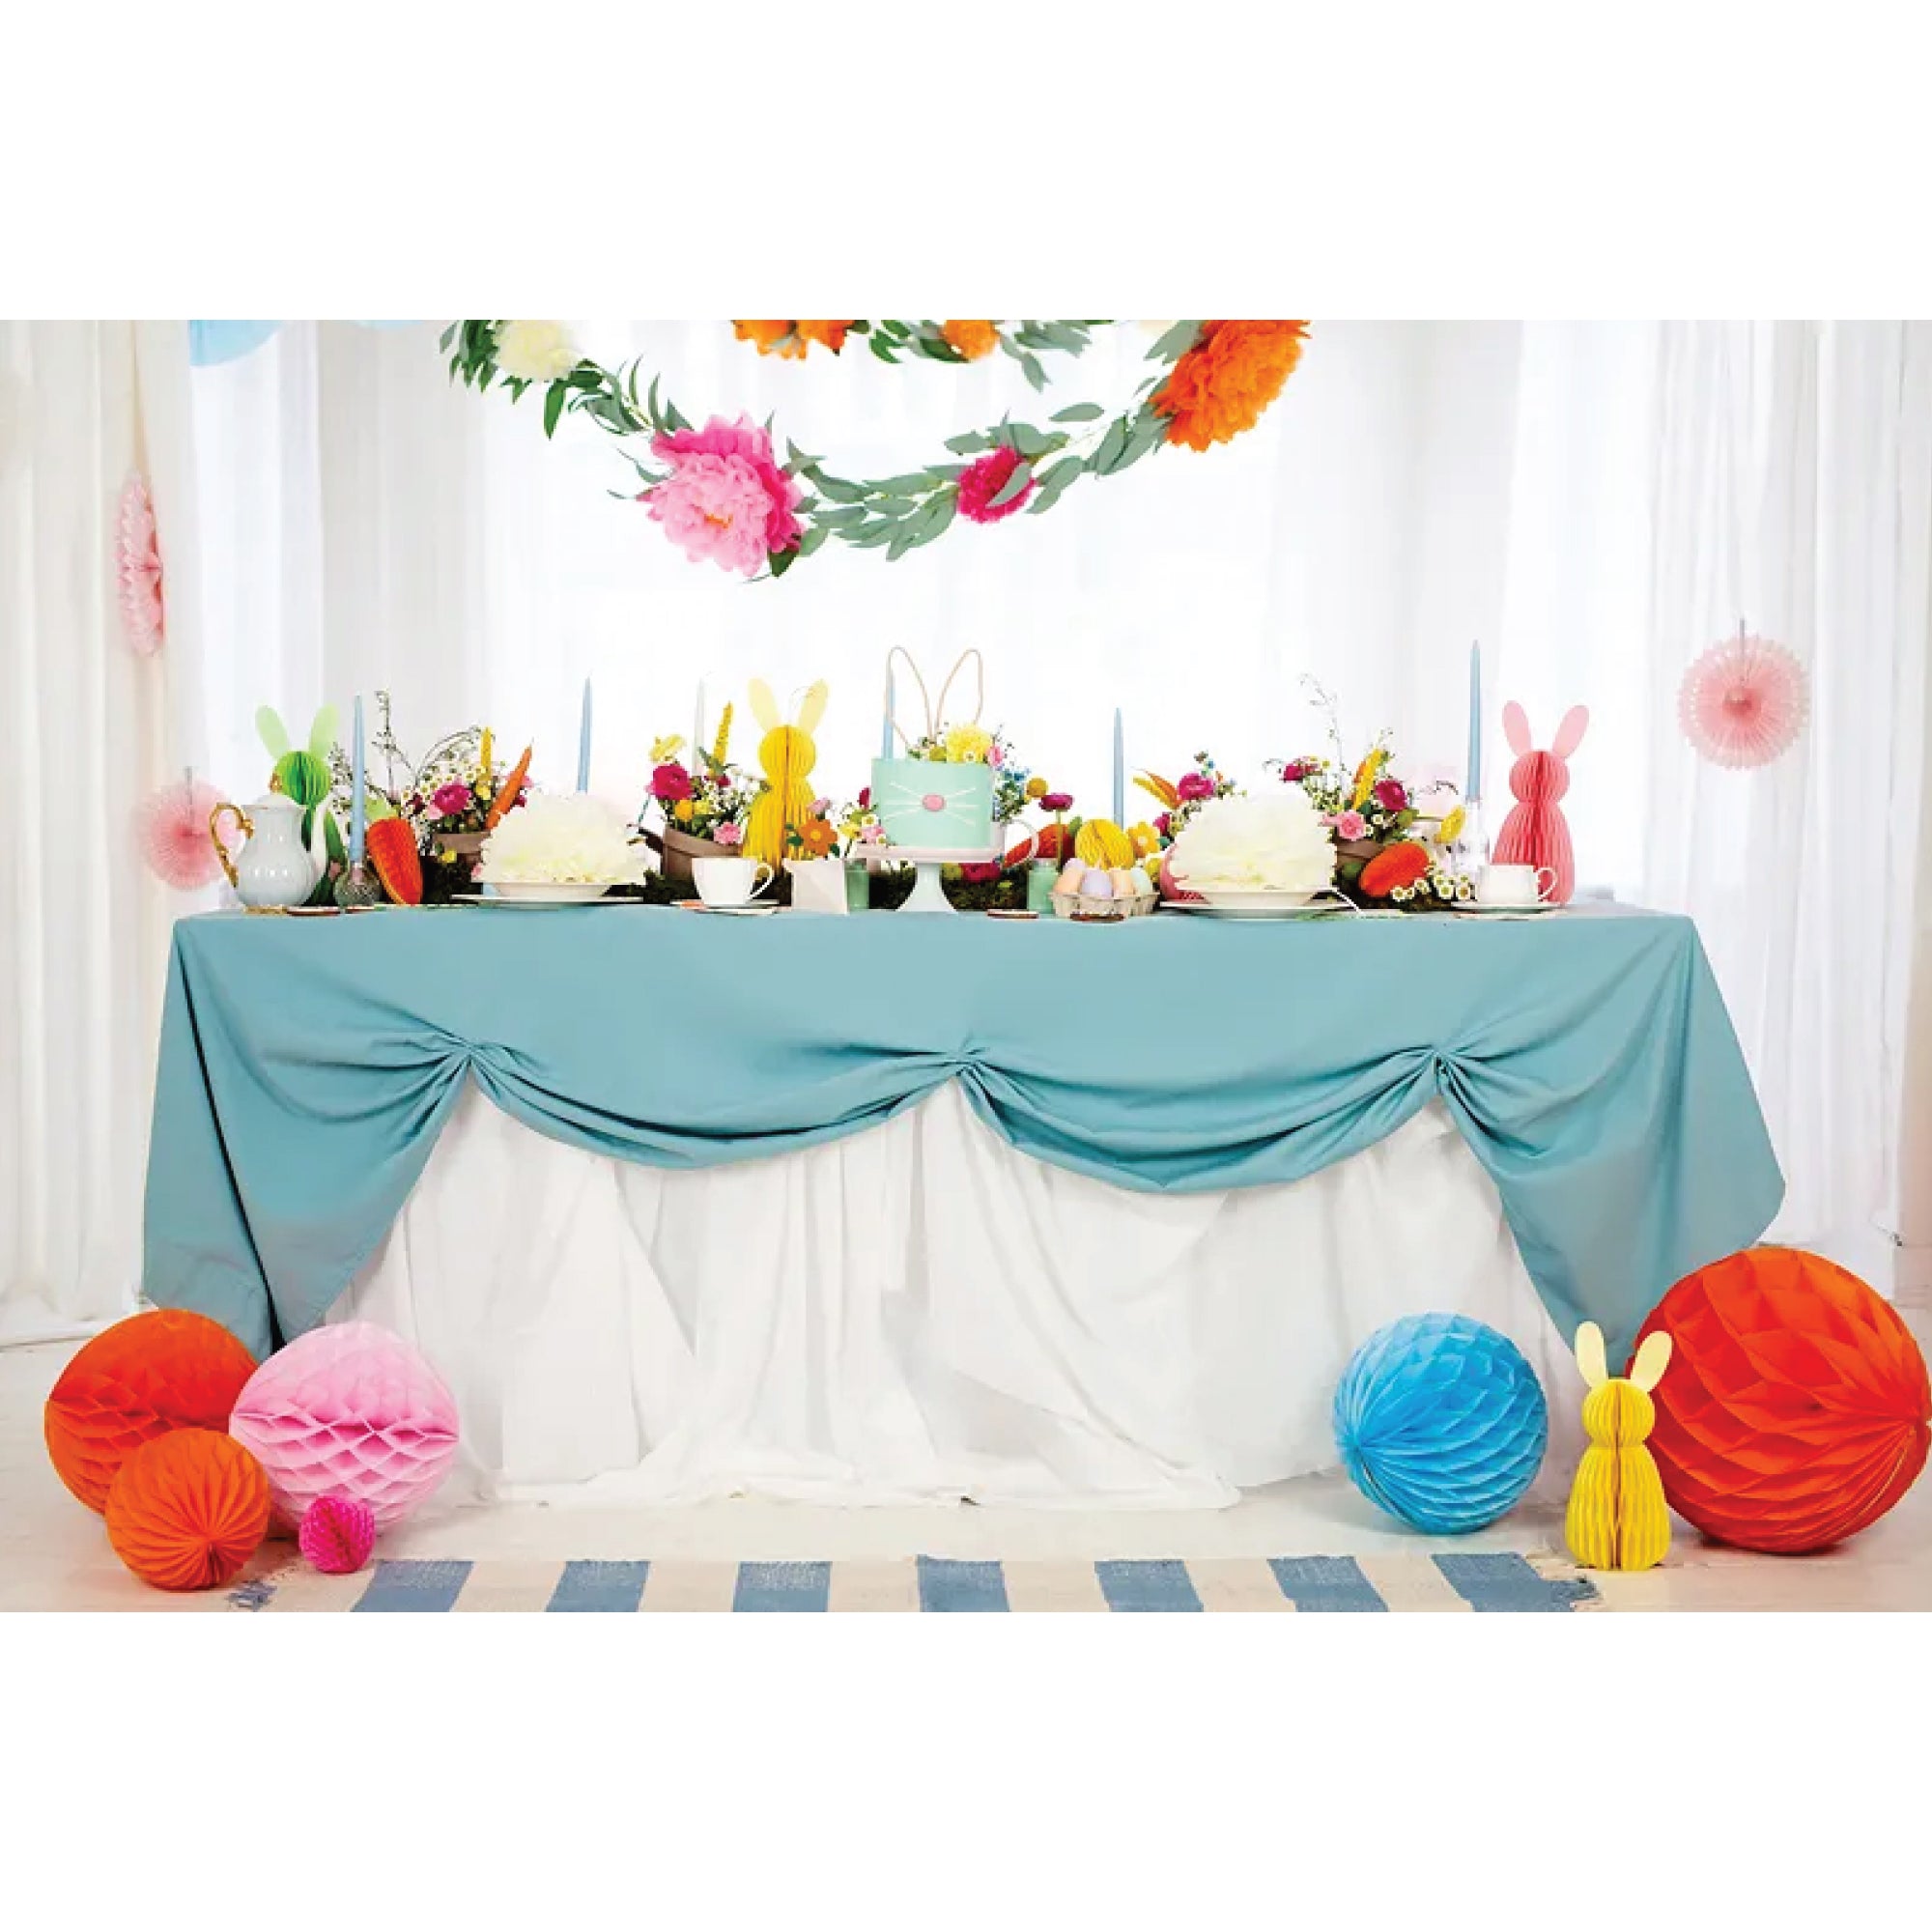 Green Bunny Honeycomb Decoration 12in | The Party Darling